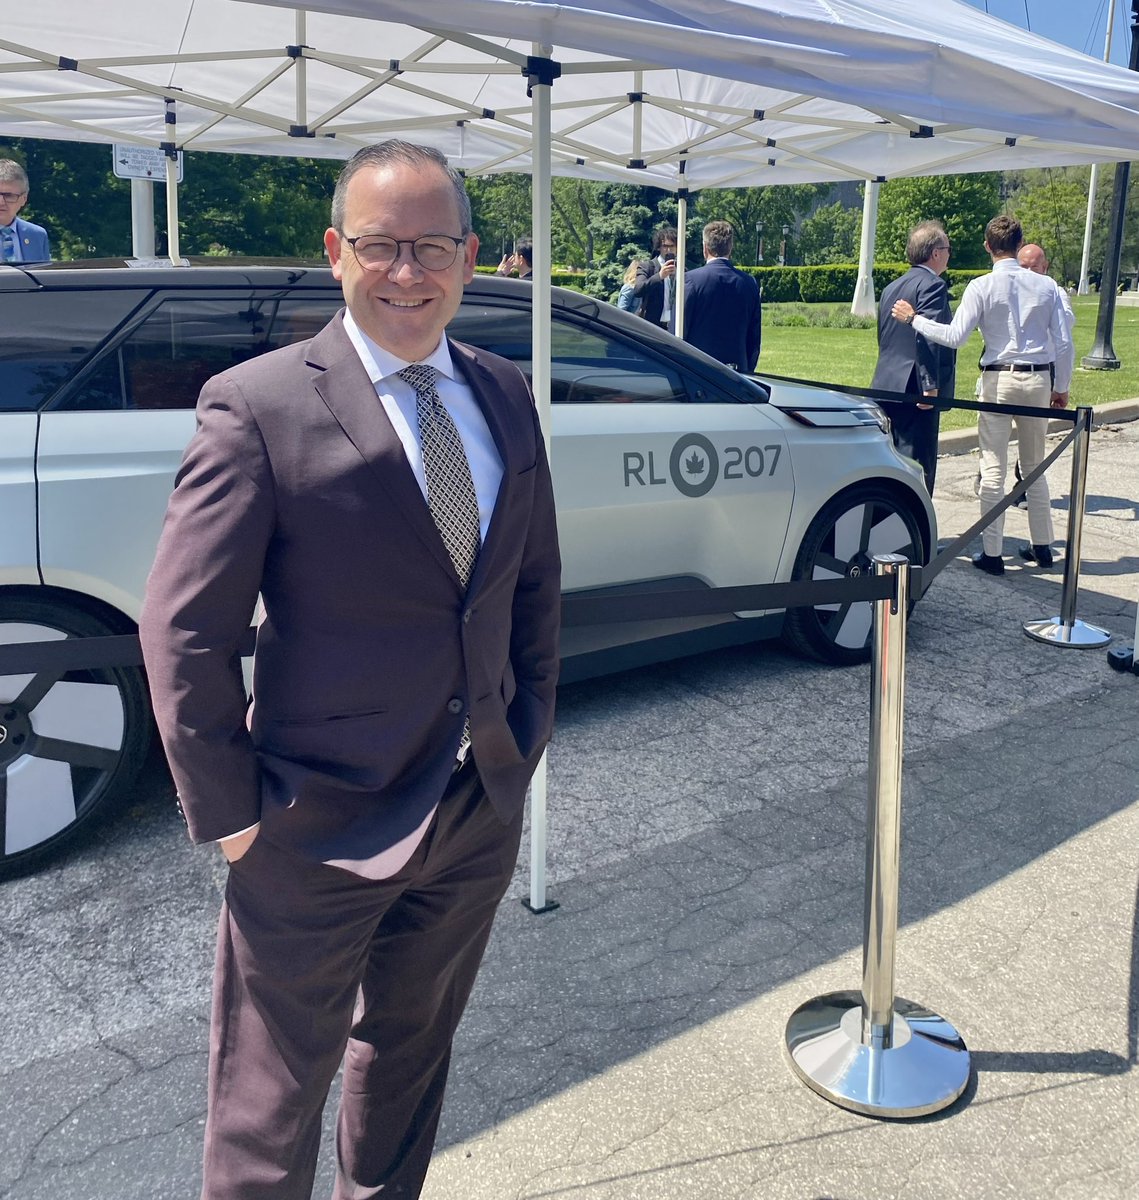 🚙: Project Arrow is at #QueensPark today!

This is the first all-Canadian, #zeroemission concept vehicle designed and built right here in Ontario.

We are leveraging our end-to-end auto supply chain to build the cars of the future.